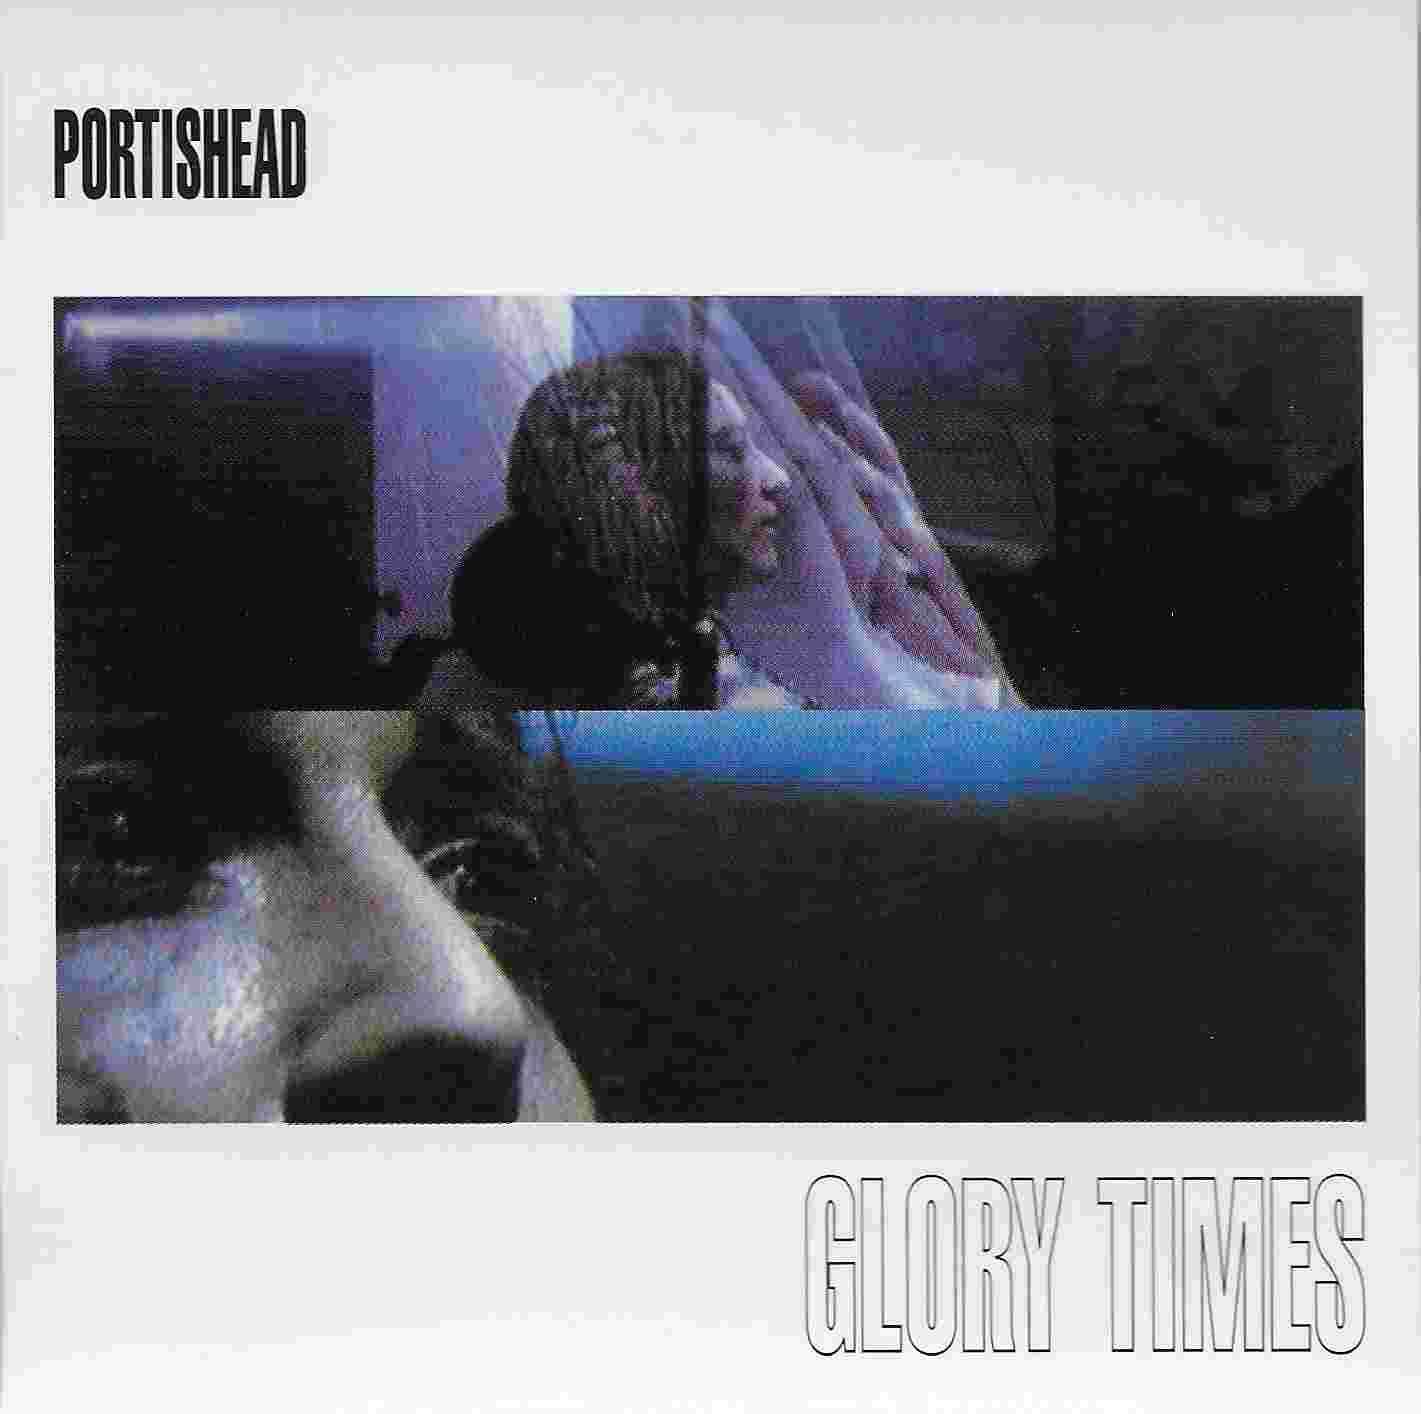 Picture of 422850167 - 2 Glory times - Canadian import by artist Portishead 